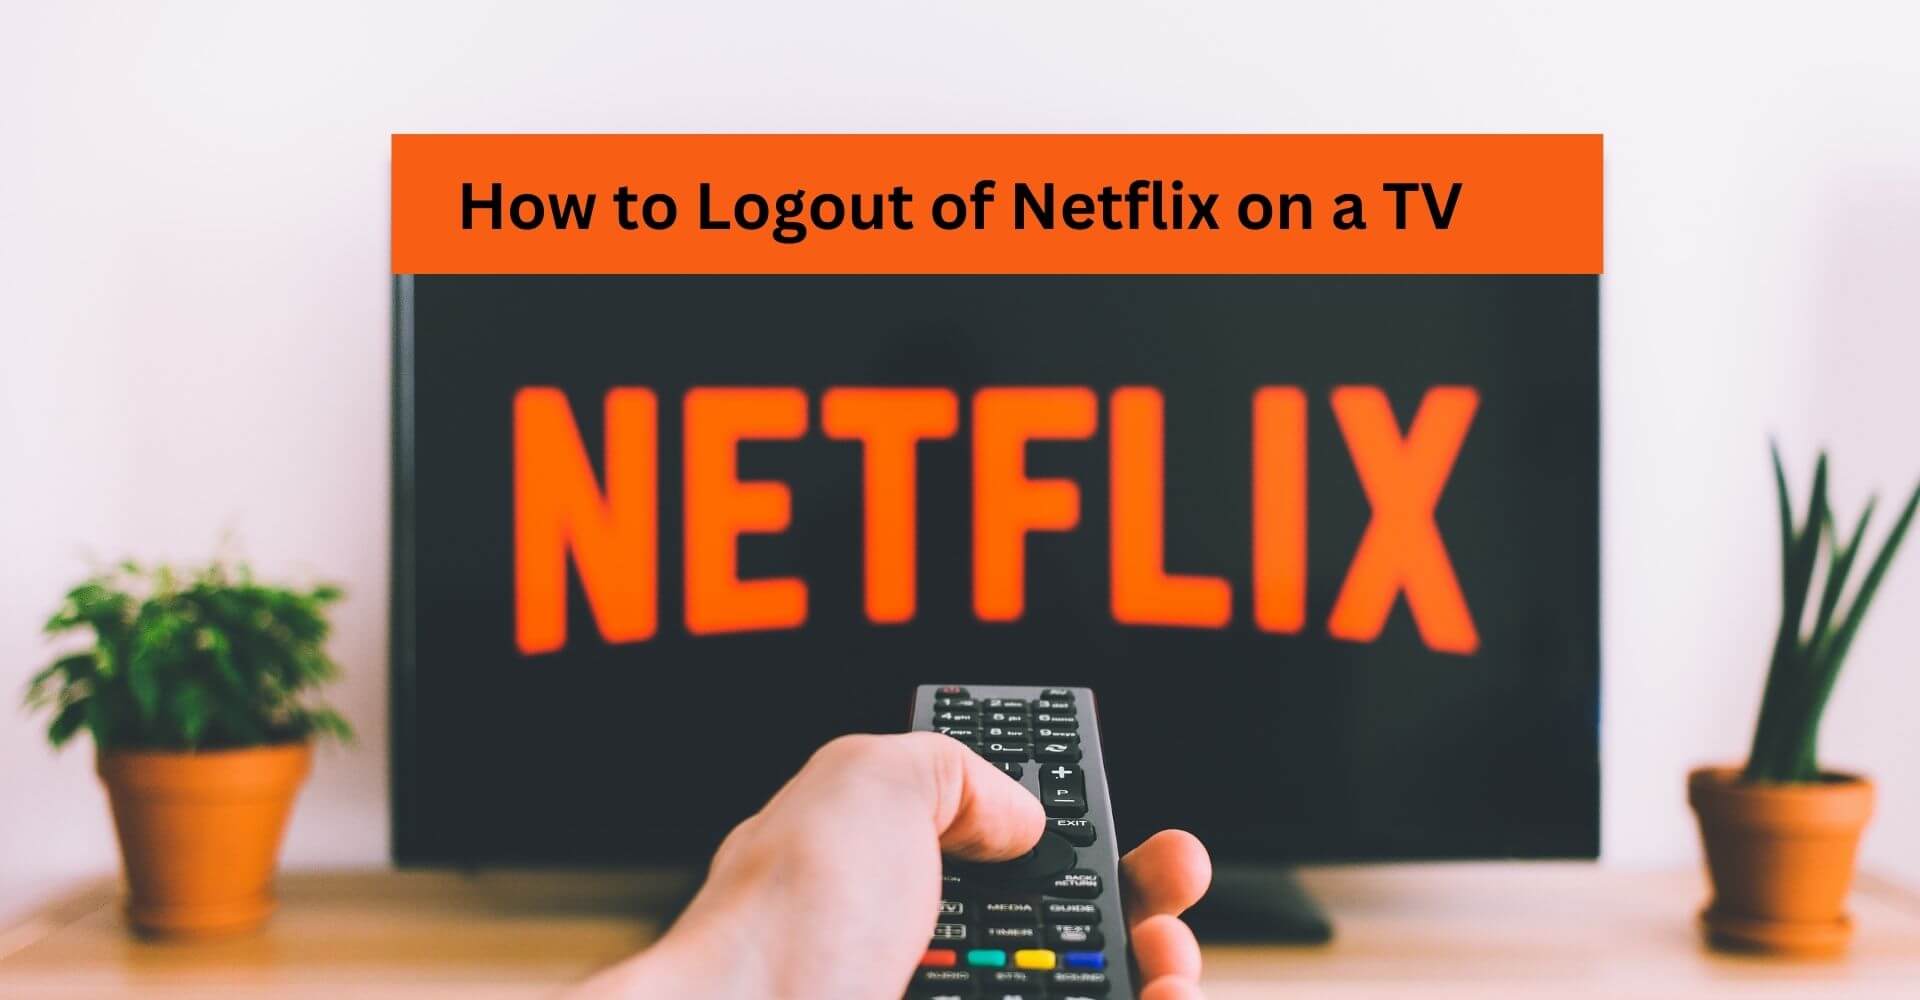 How to Logout of Netflix on TV